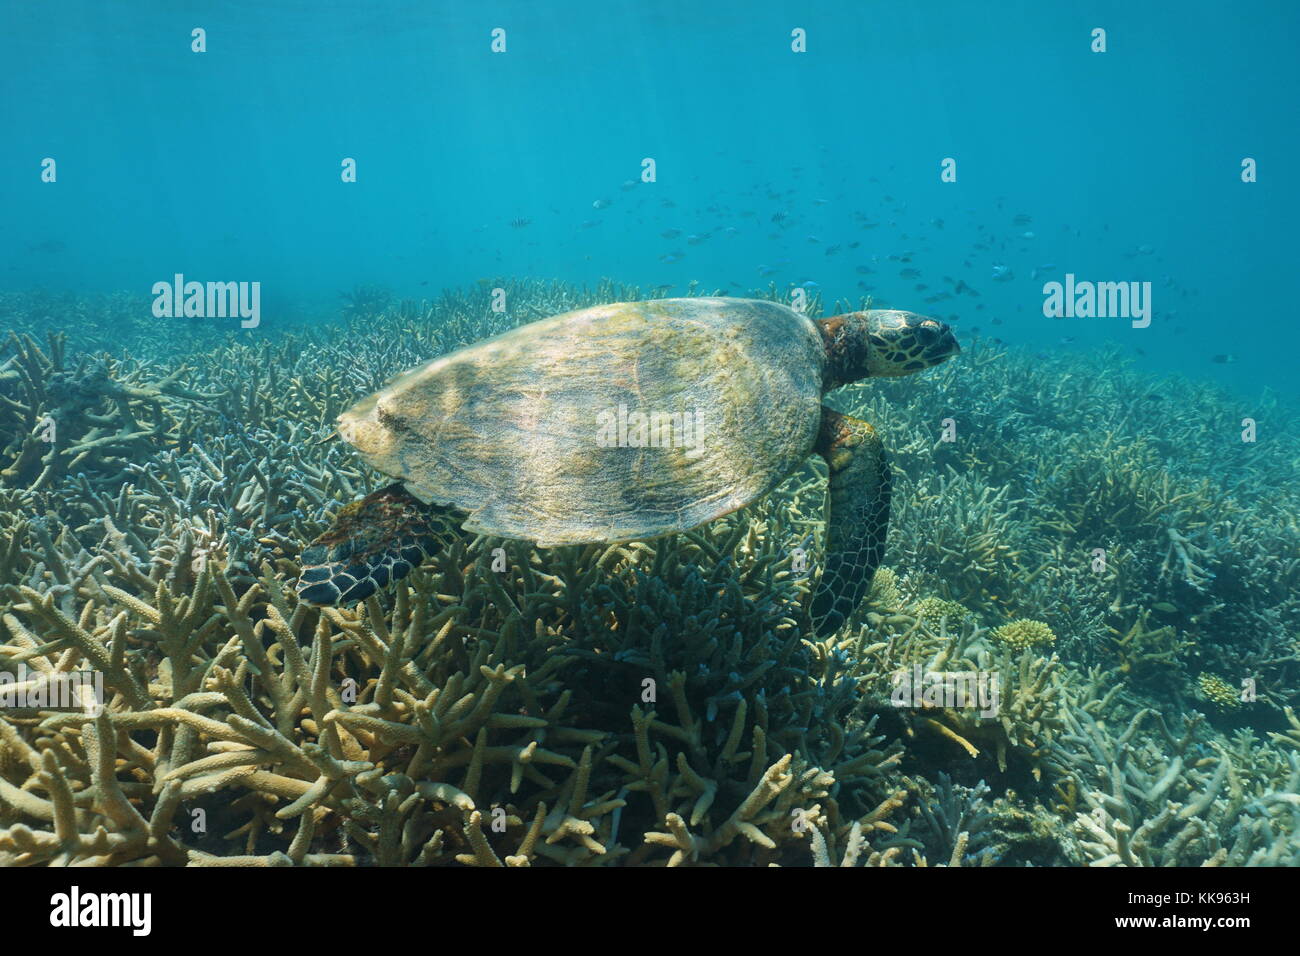 Underwater a hawksbill sea turtle Eretmochelys imbricata, over a coral reef, New Caledonia, south Pacific ocean, Oceania Stock Photo